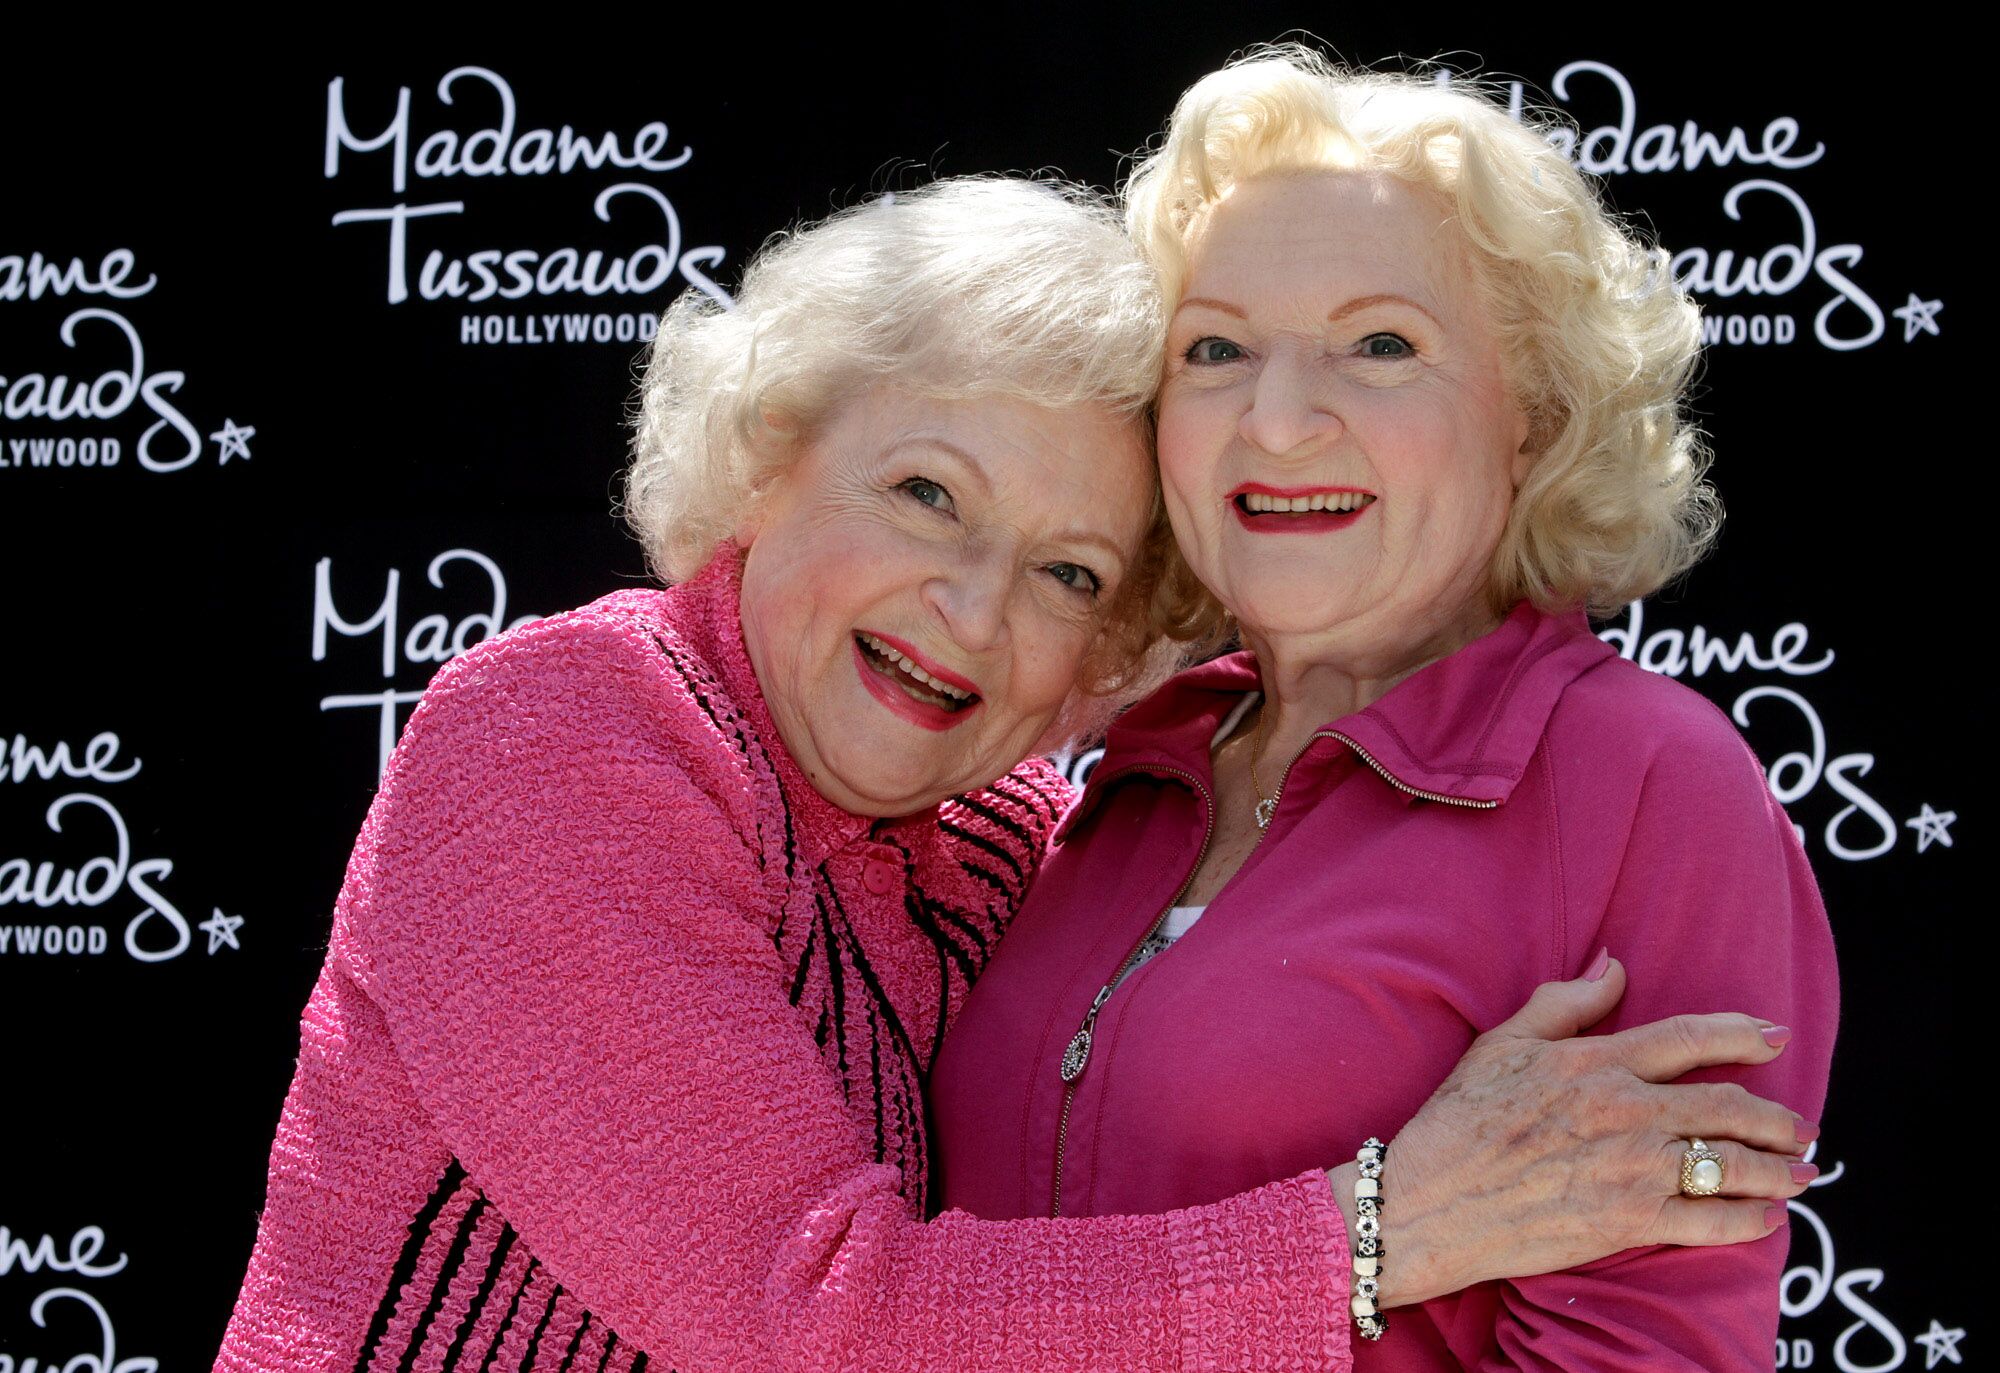 Actress Betty White poses next to a wax figure in her likeness at Madame Tussauds in Hollywood.